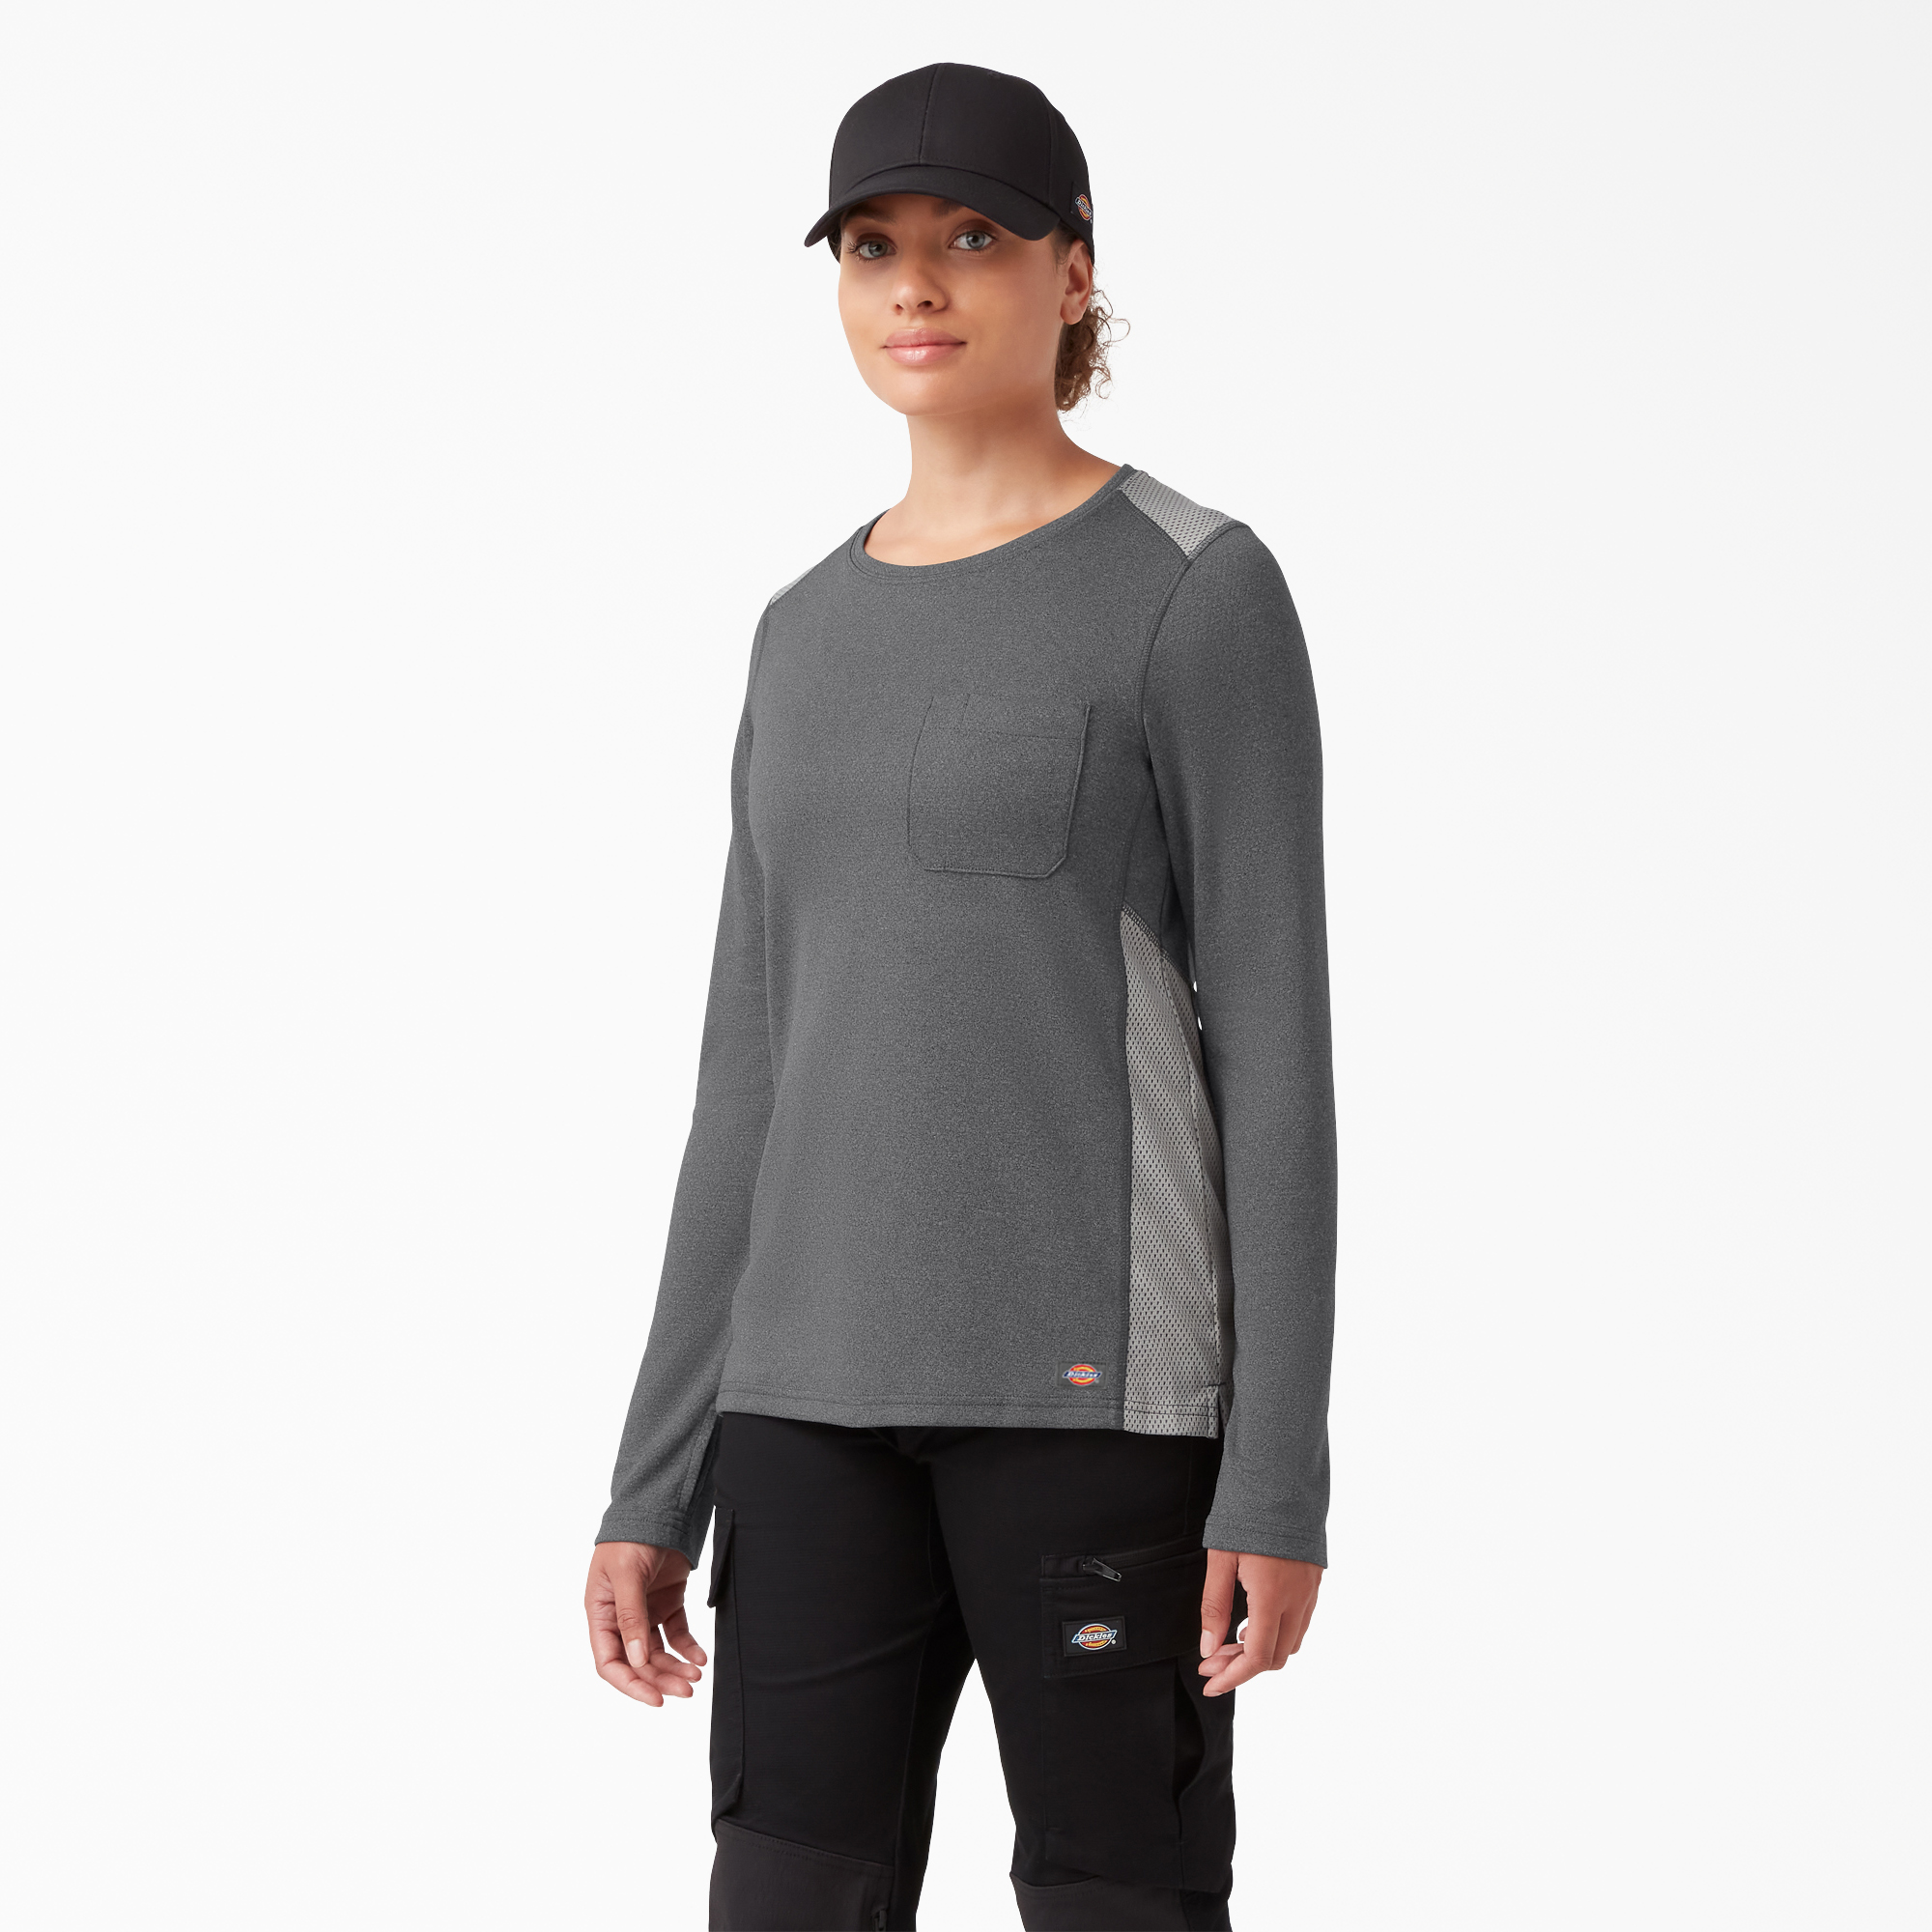 Details about   Dickies Women's Long Sleeve Crew Neck Thermal Shir Choose SZ/color 